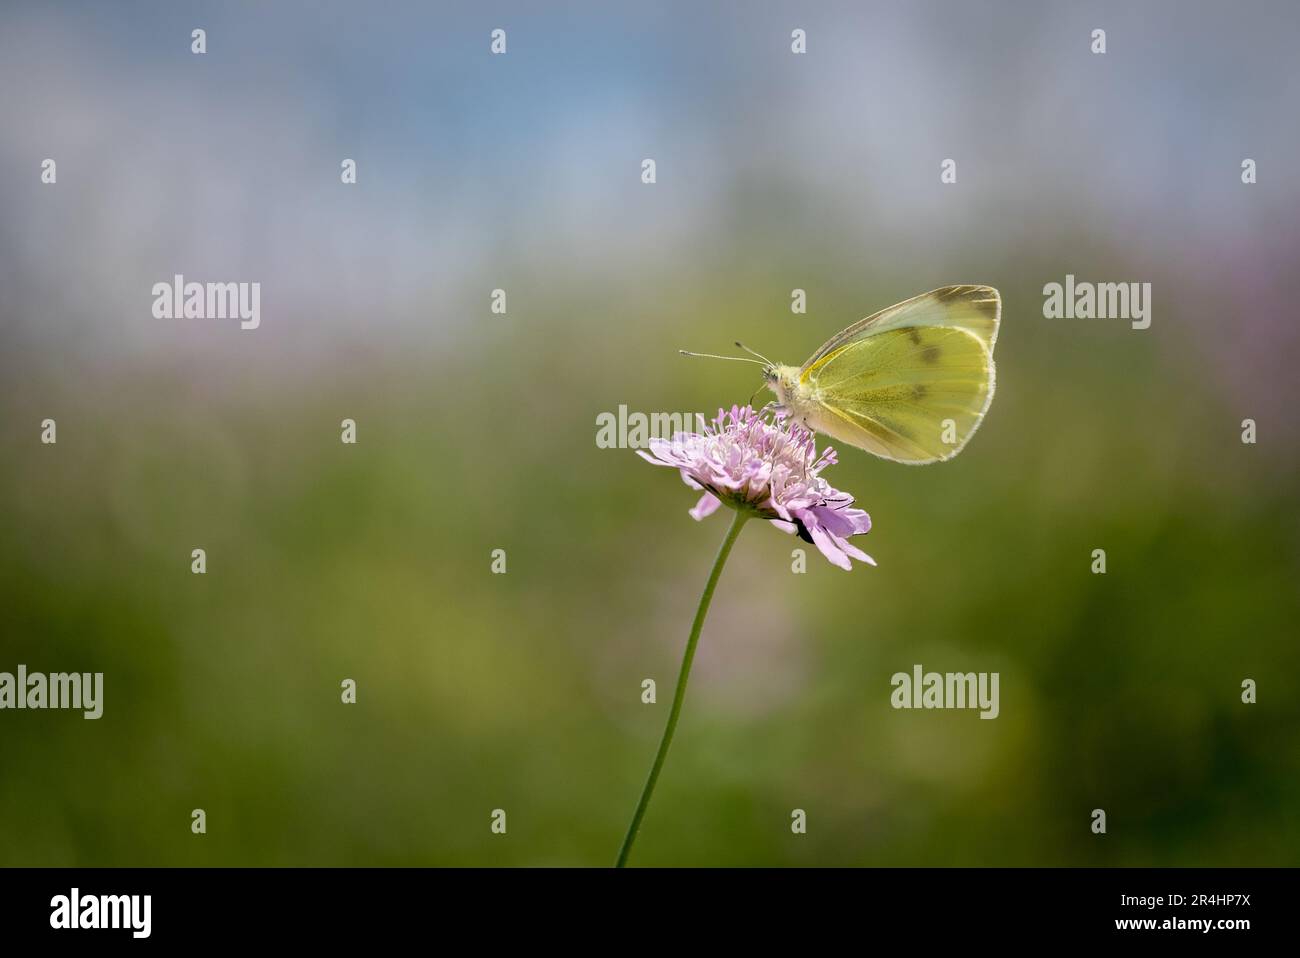 Cabbage white butterfly sitting on a flower Stock Photo